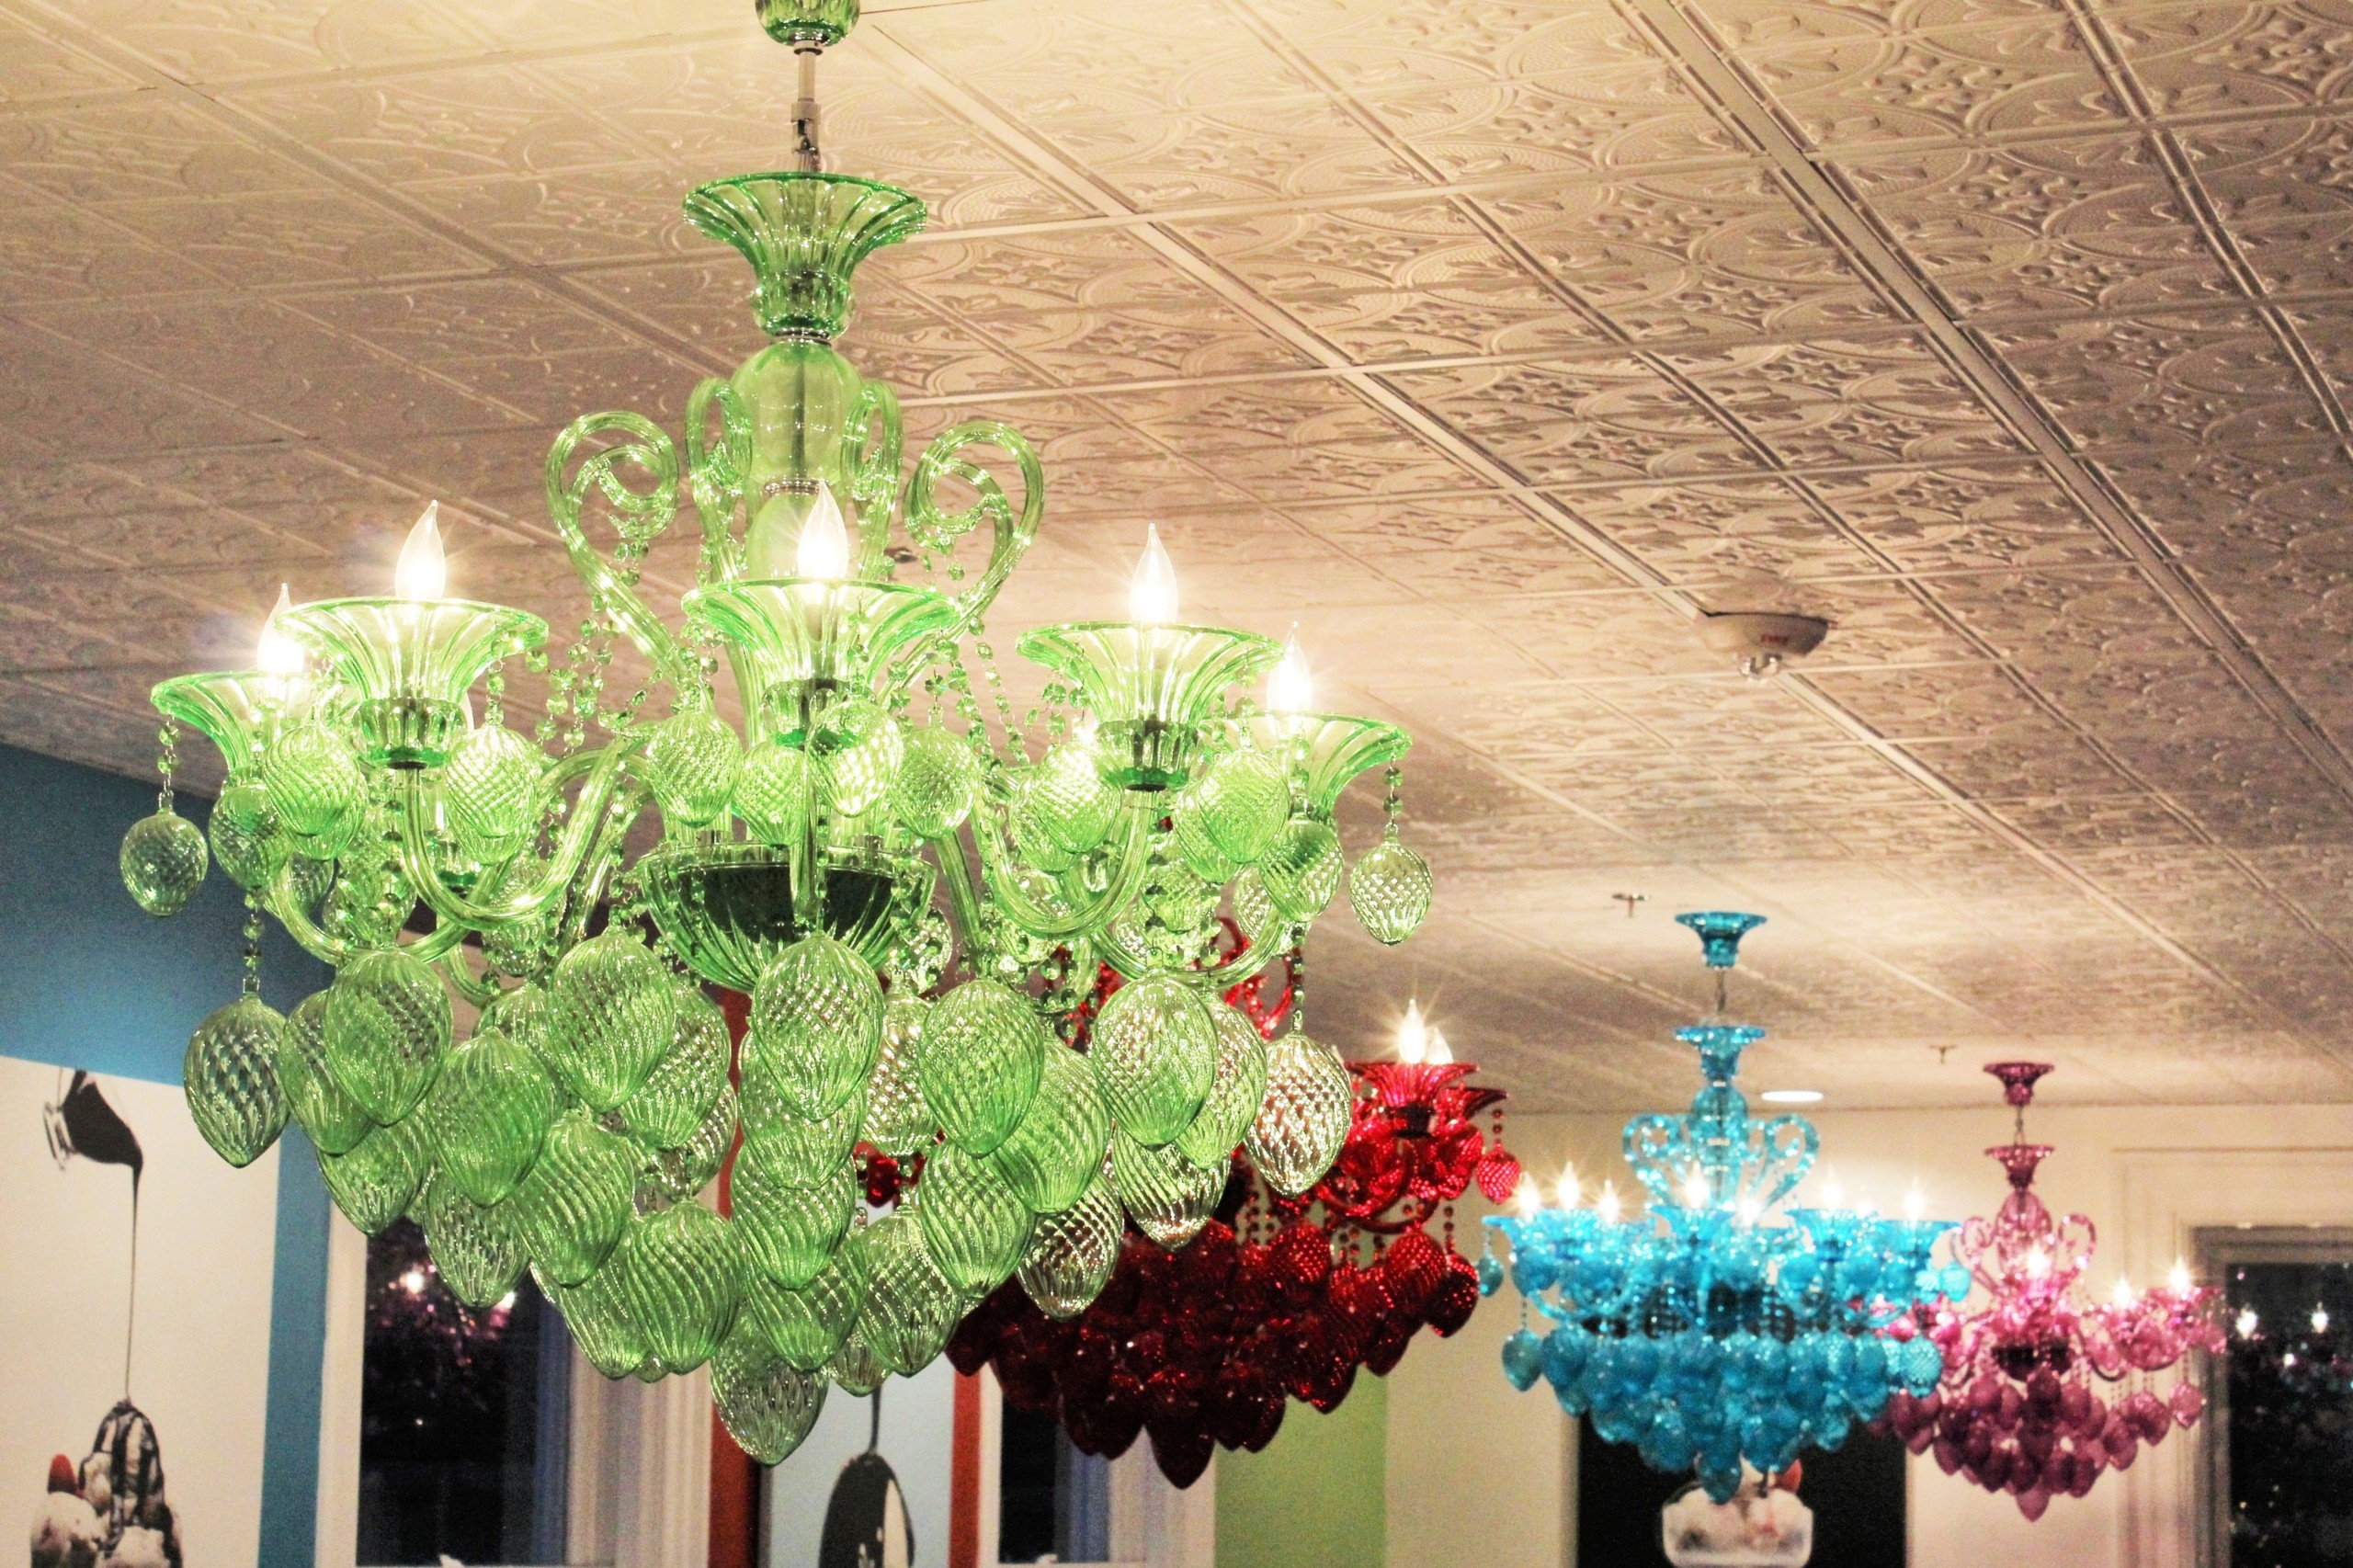 Sweetpetes rainbow chandeliers ceiling lights